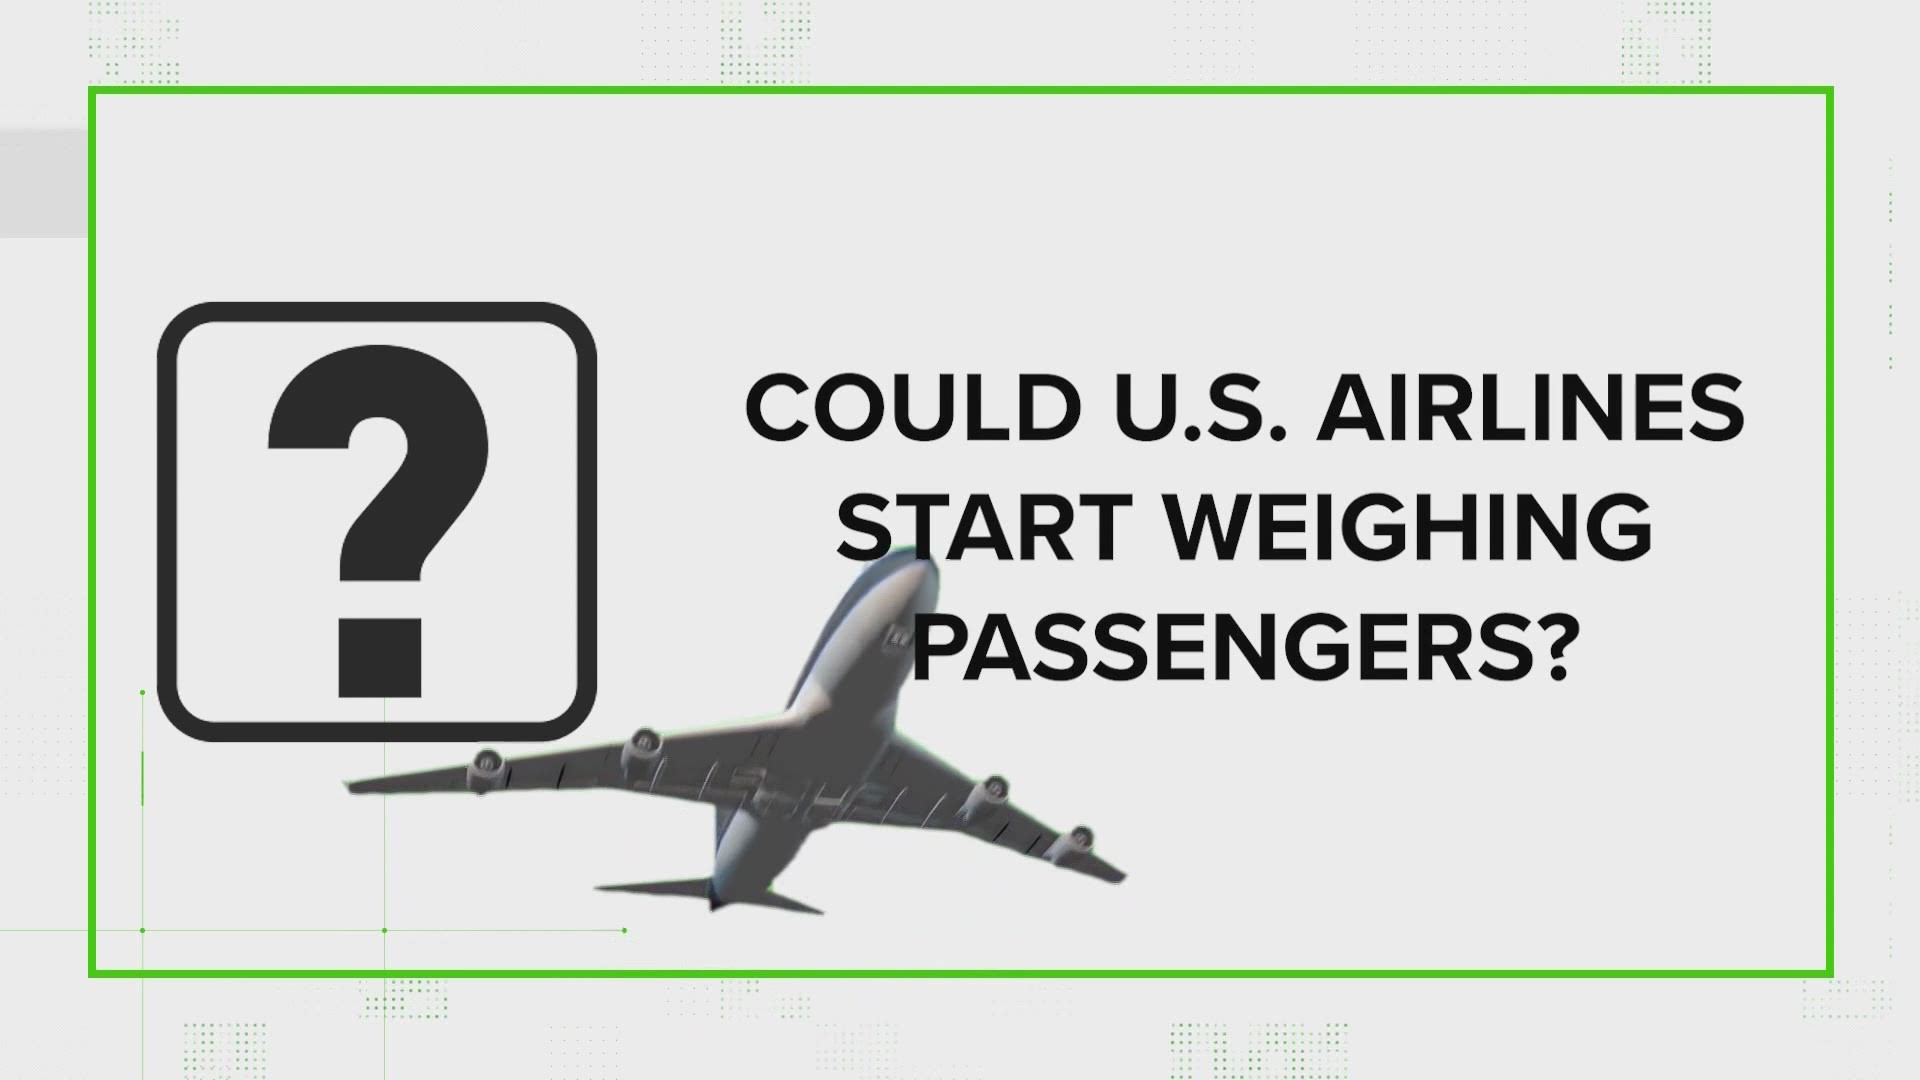 As more people return to flying, a blog post about airlines potentially weighing passengers has caught the attention of people on social media.